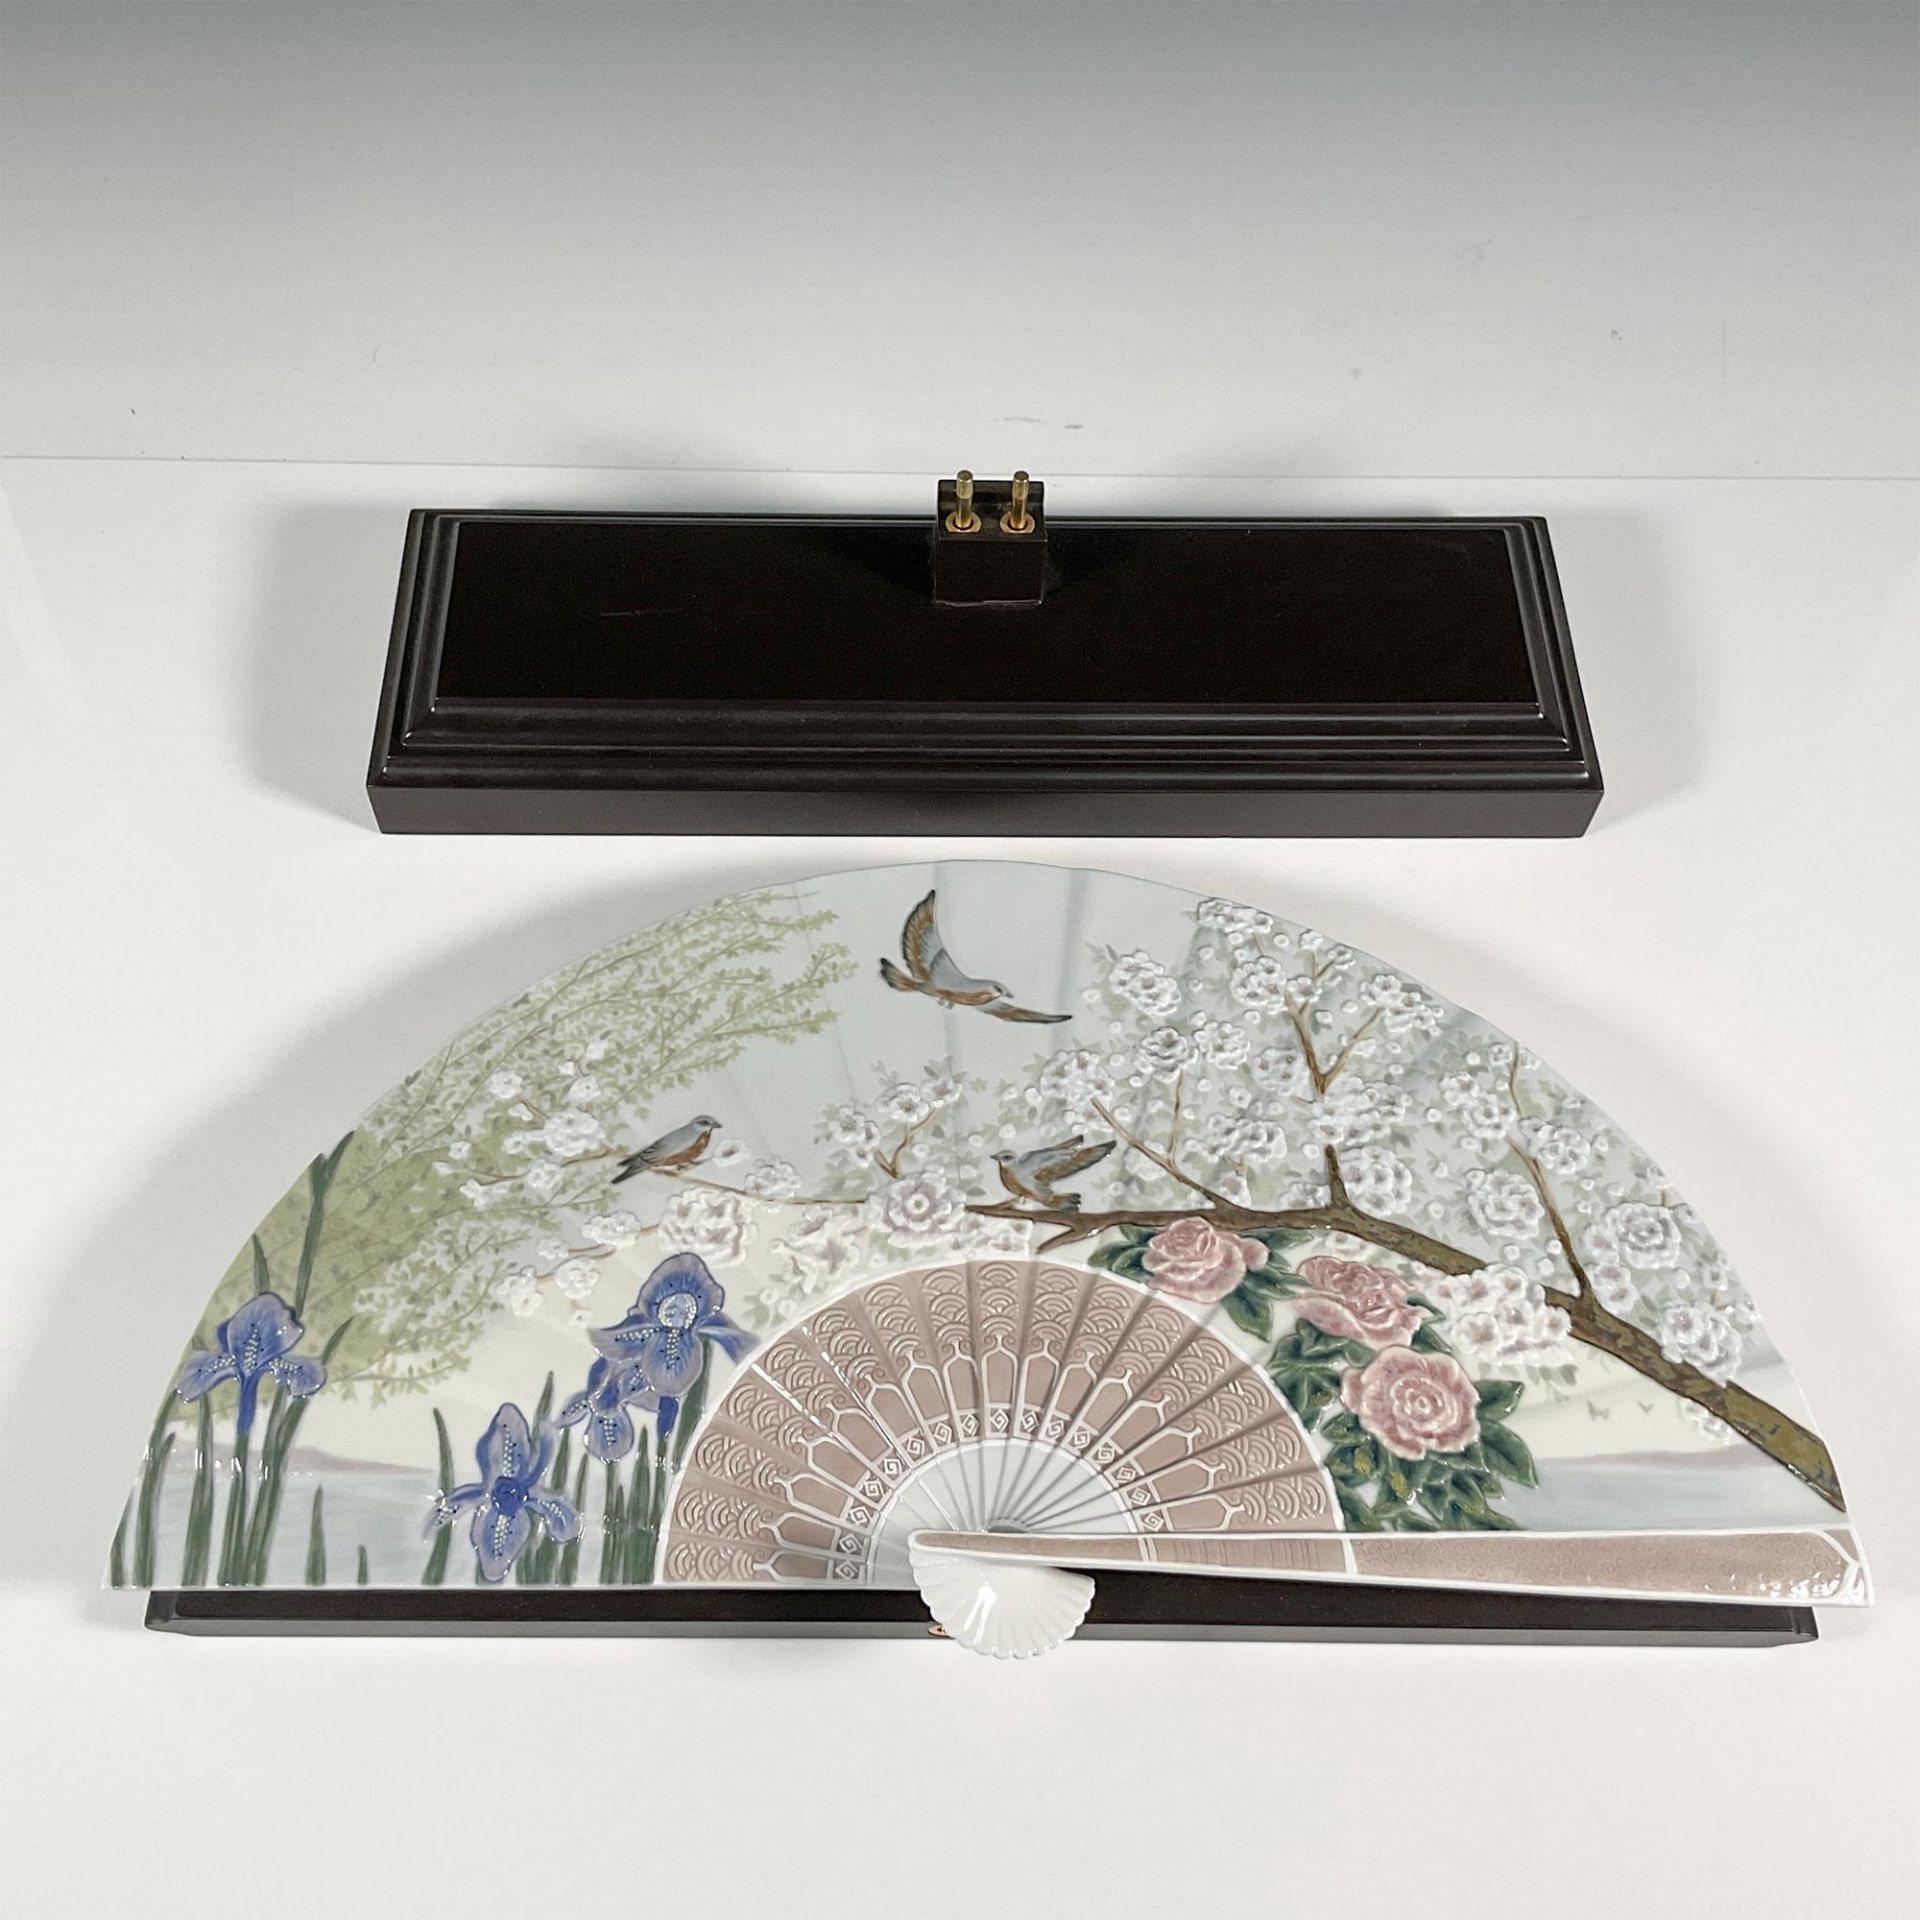 Lladro Porcelain Folding Fan And Wood Stand - Image 3 of 3